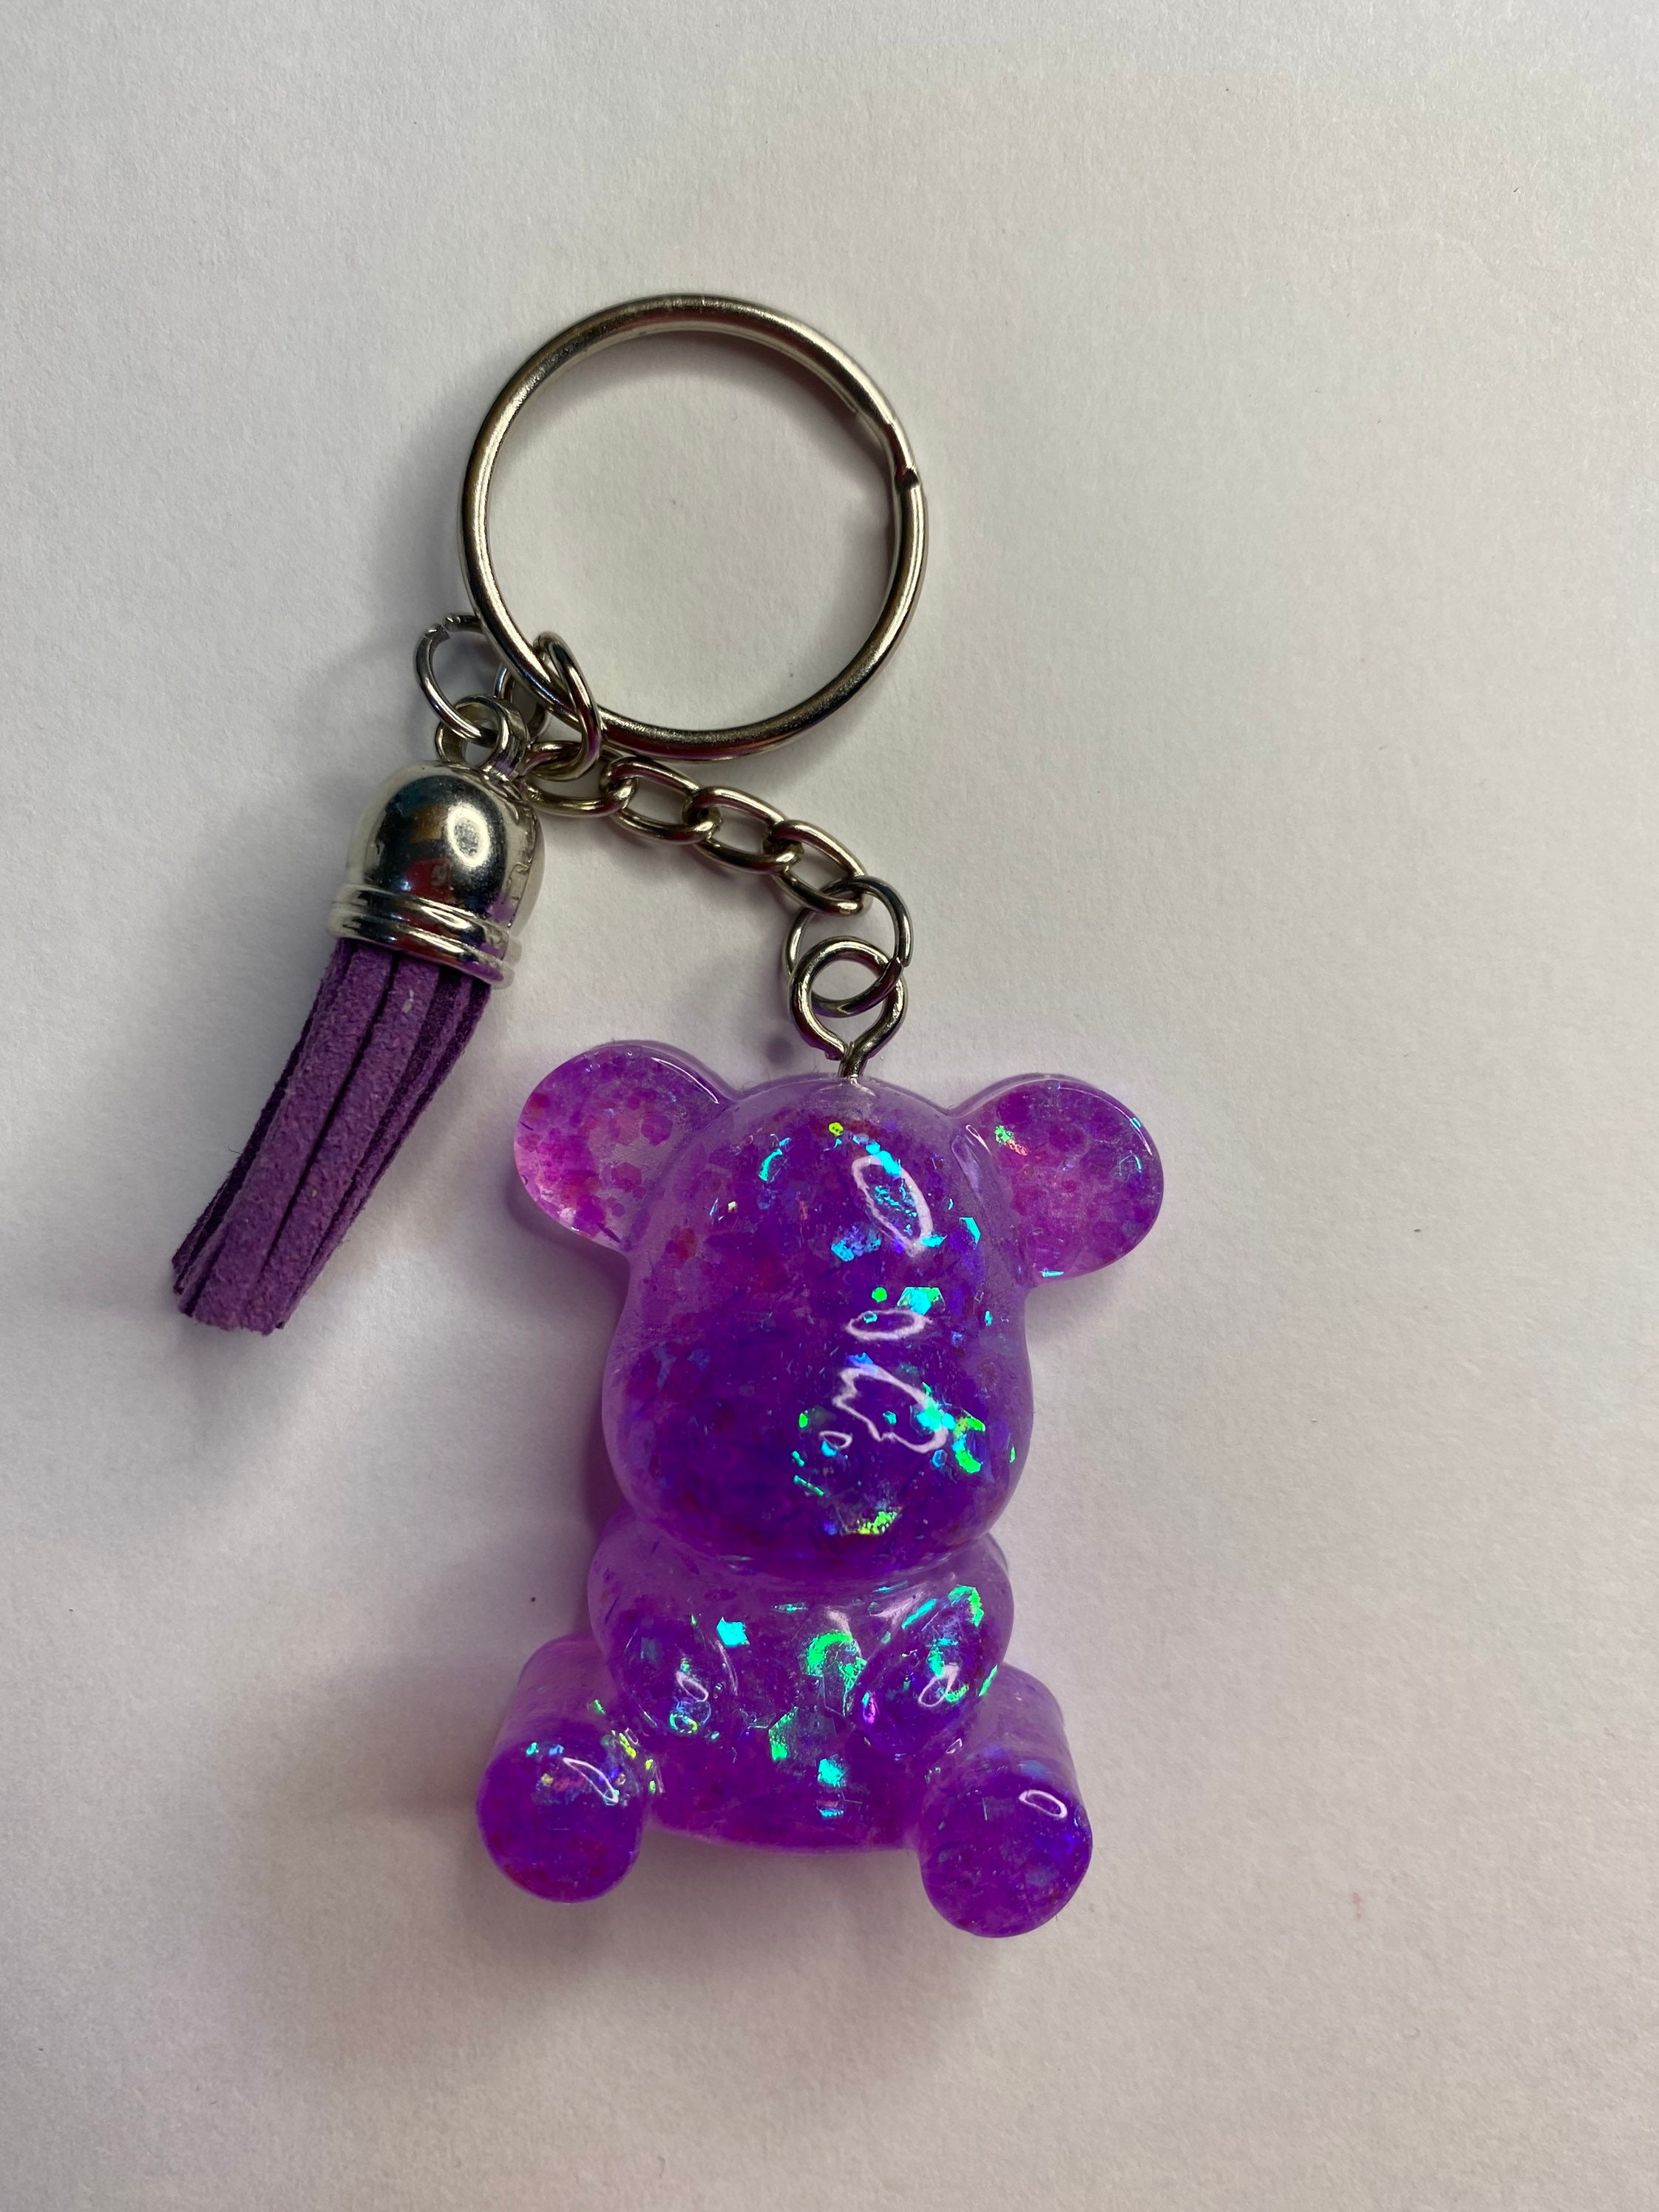 Teddy Bear Keychain made with Resin and Glitter | Etsy